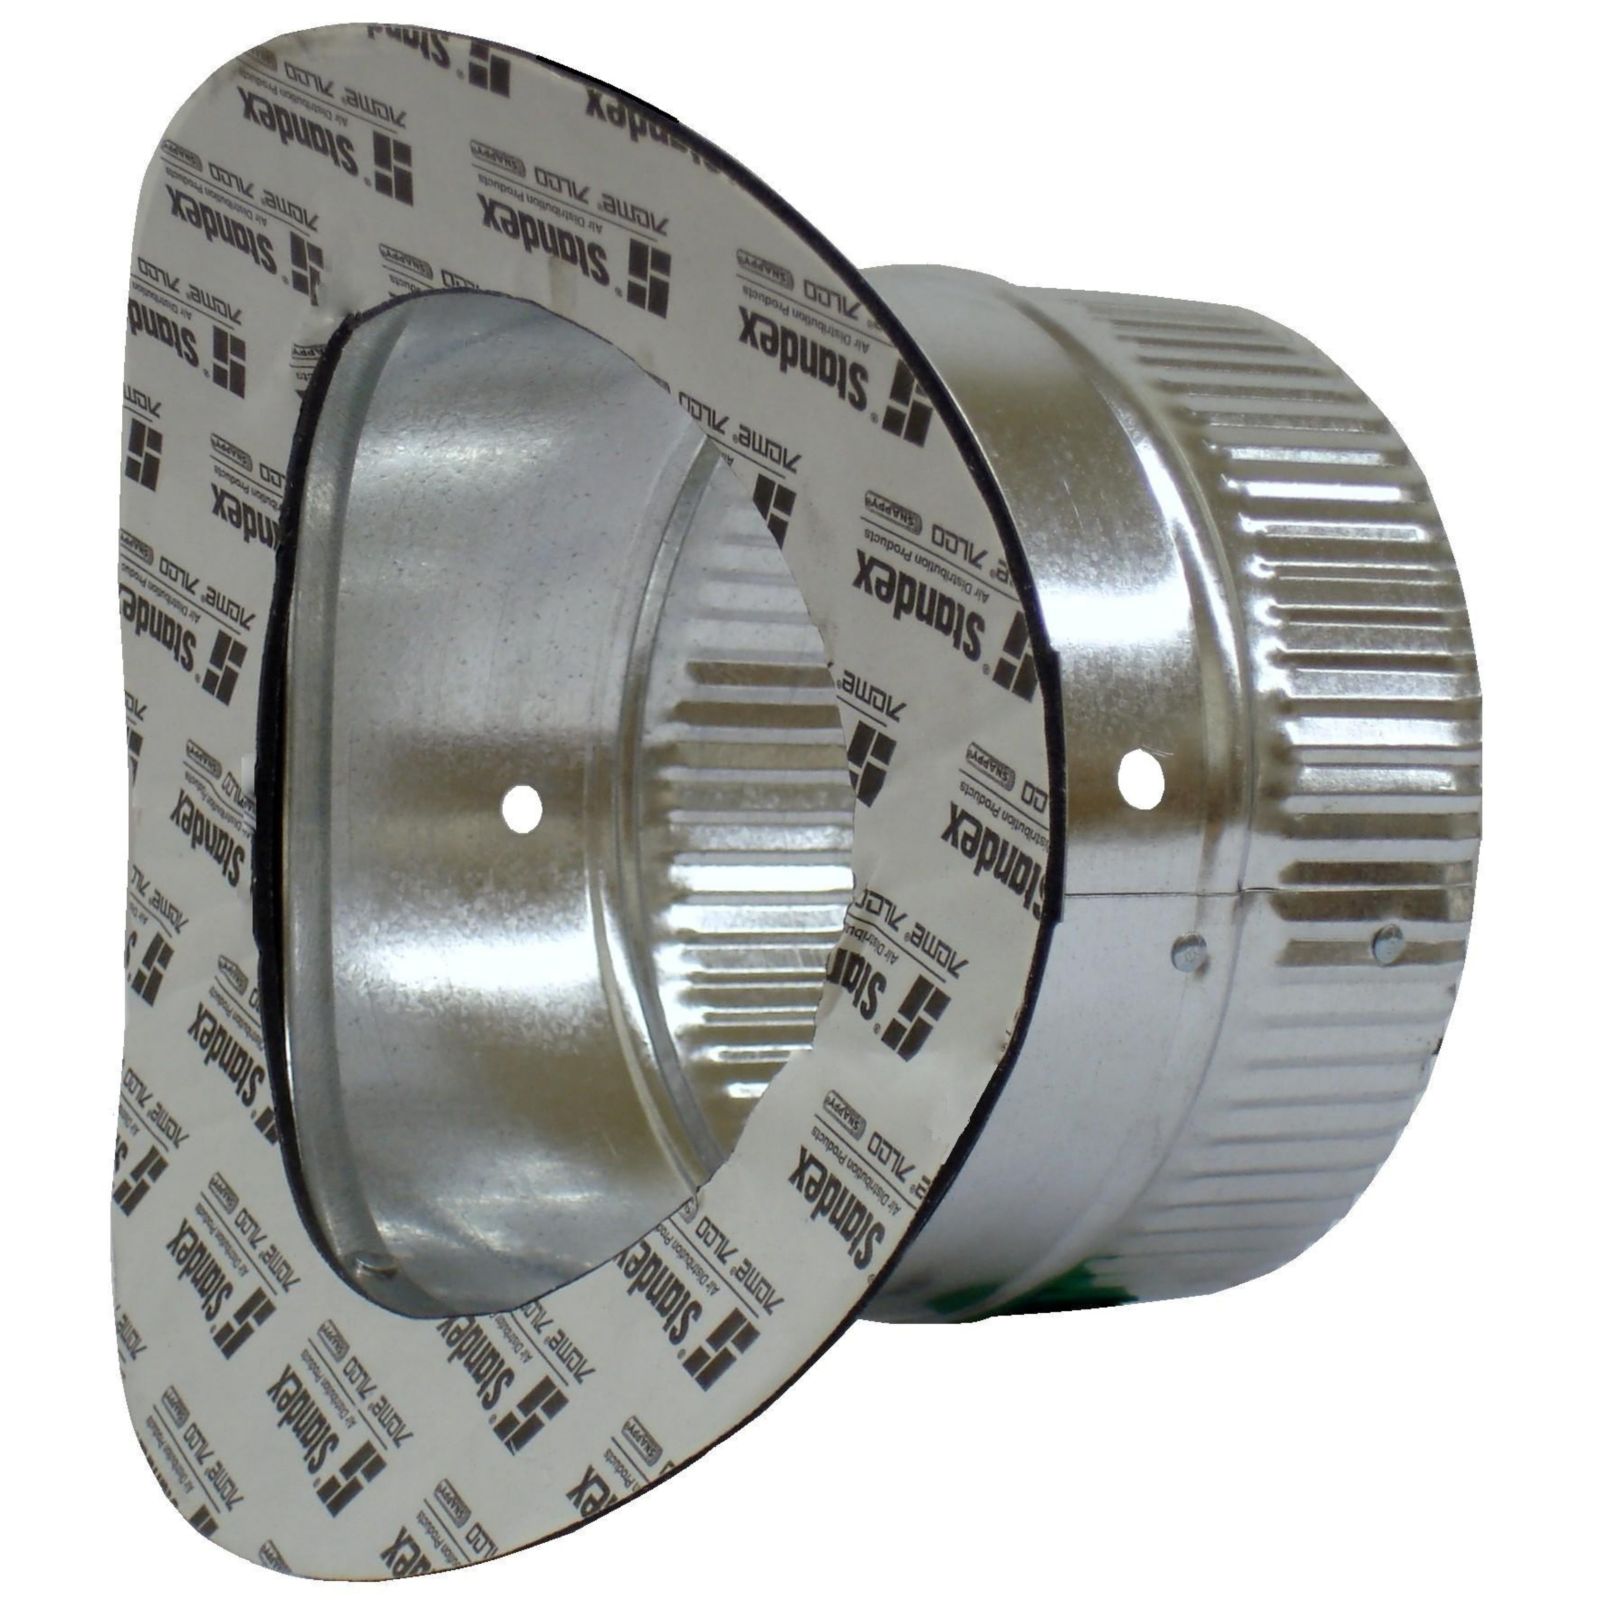 Snappy 171-7 - #171 - Round Adhesive Takeoff, 6" Tube Length, 1 1/2" Flange, for 7" Round Pipe, 26 Gauge